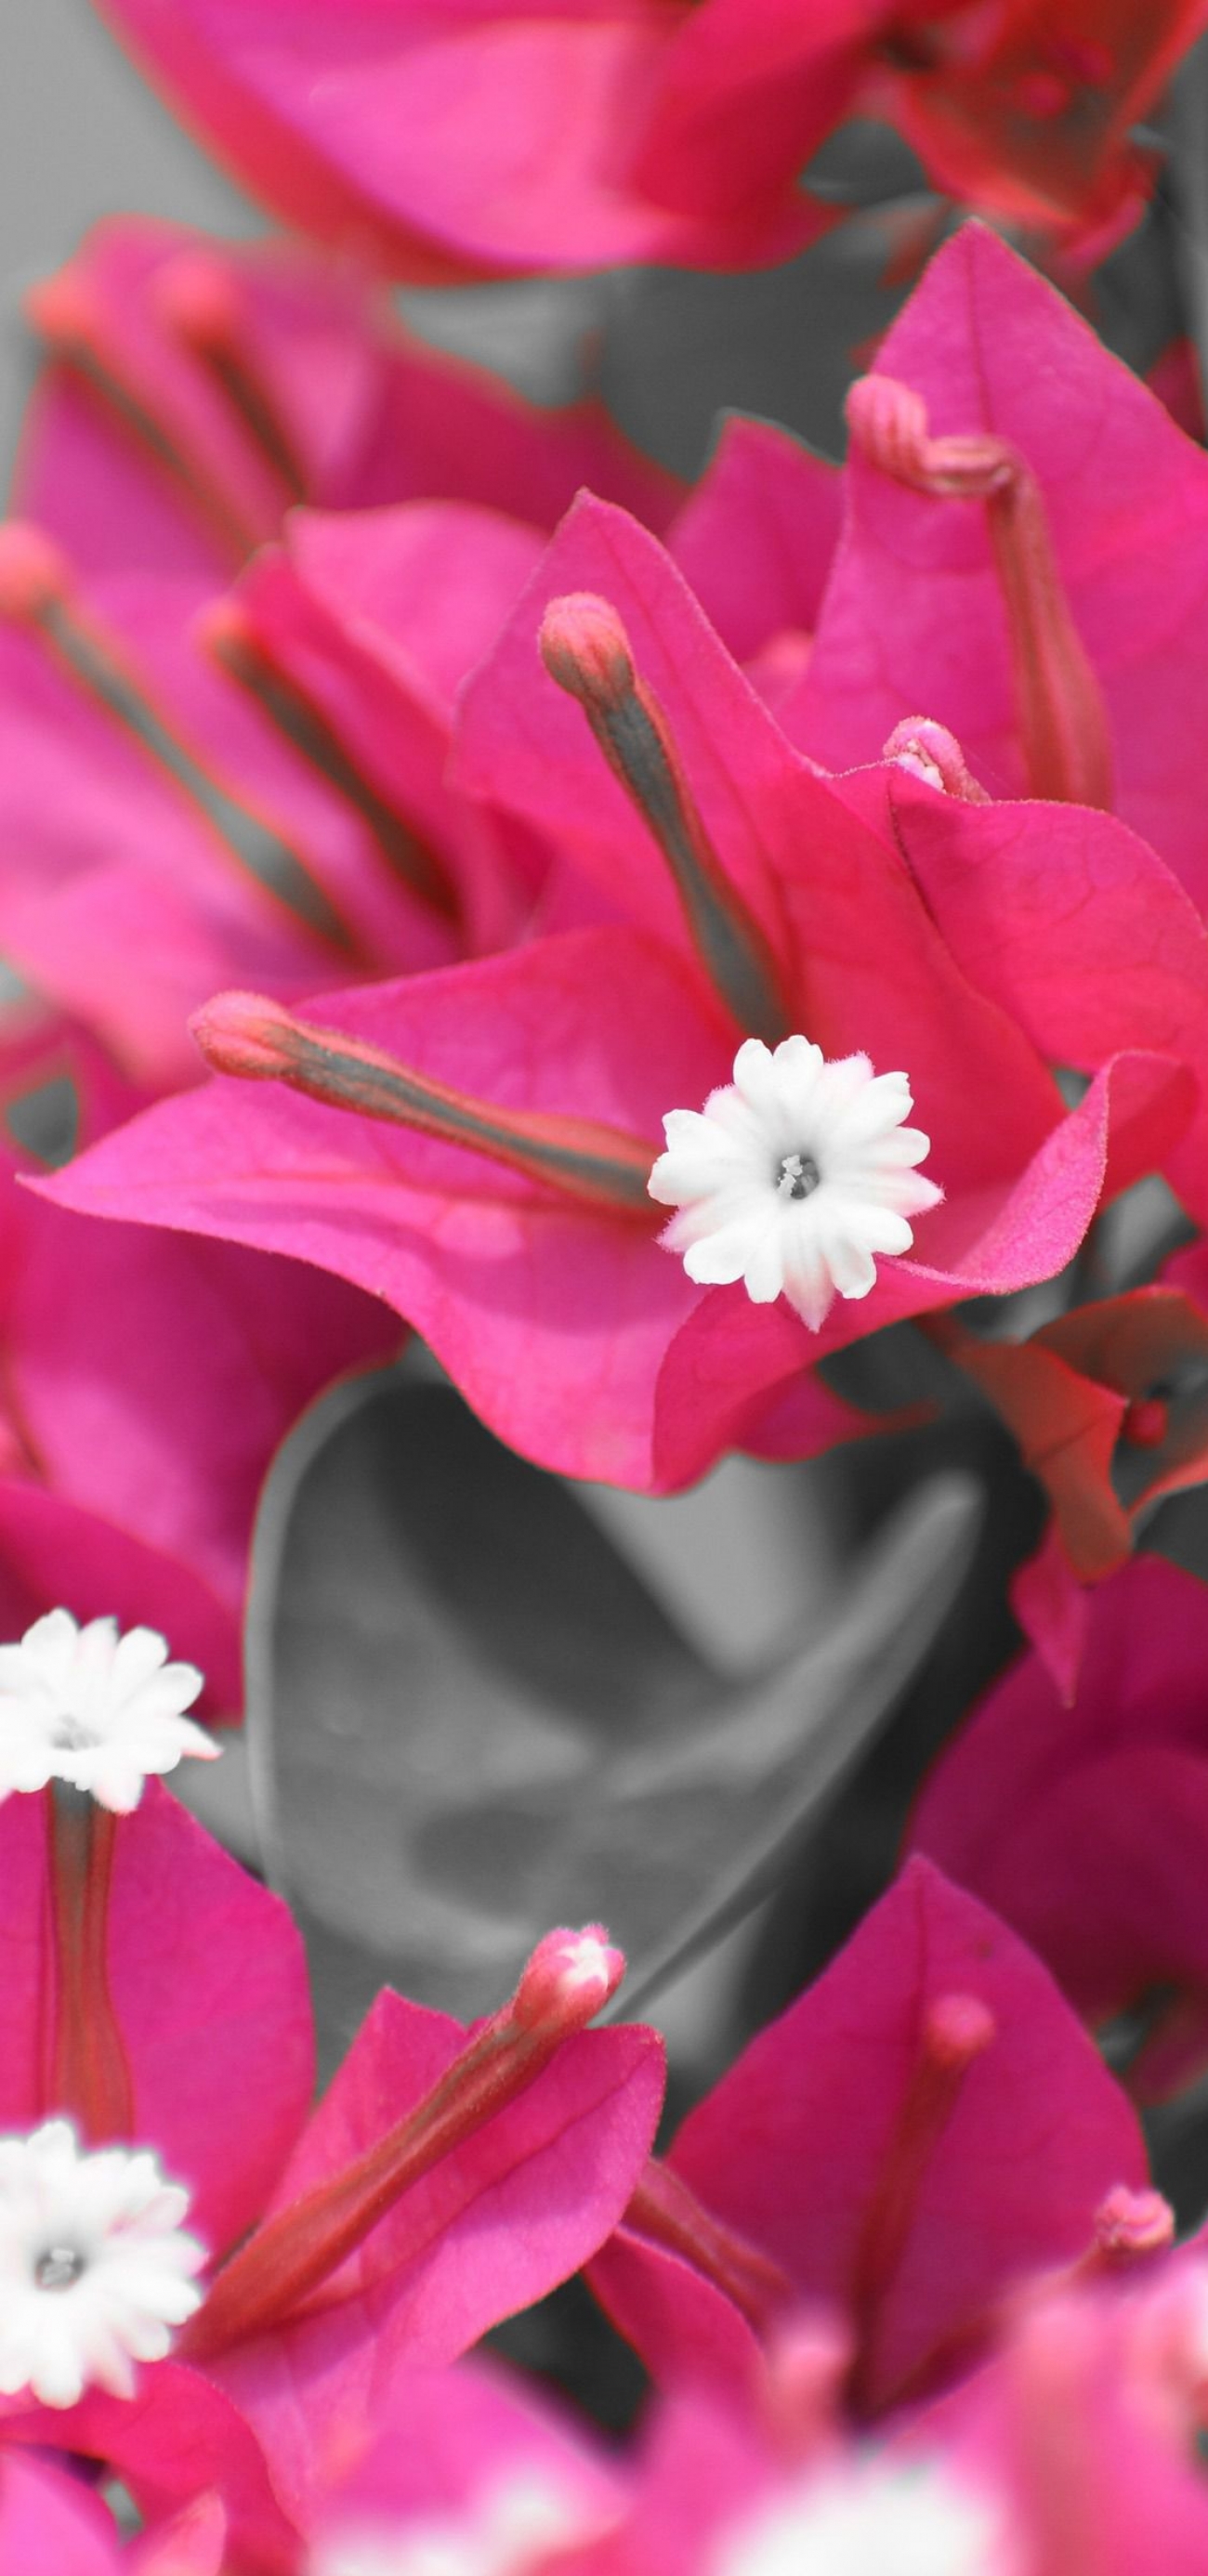 Pink and White Flower 4k Closeup Photo Wallpaper 3840x2400